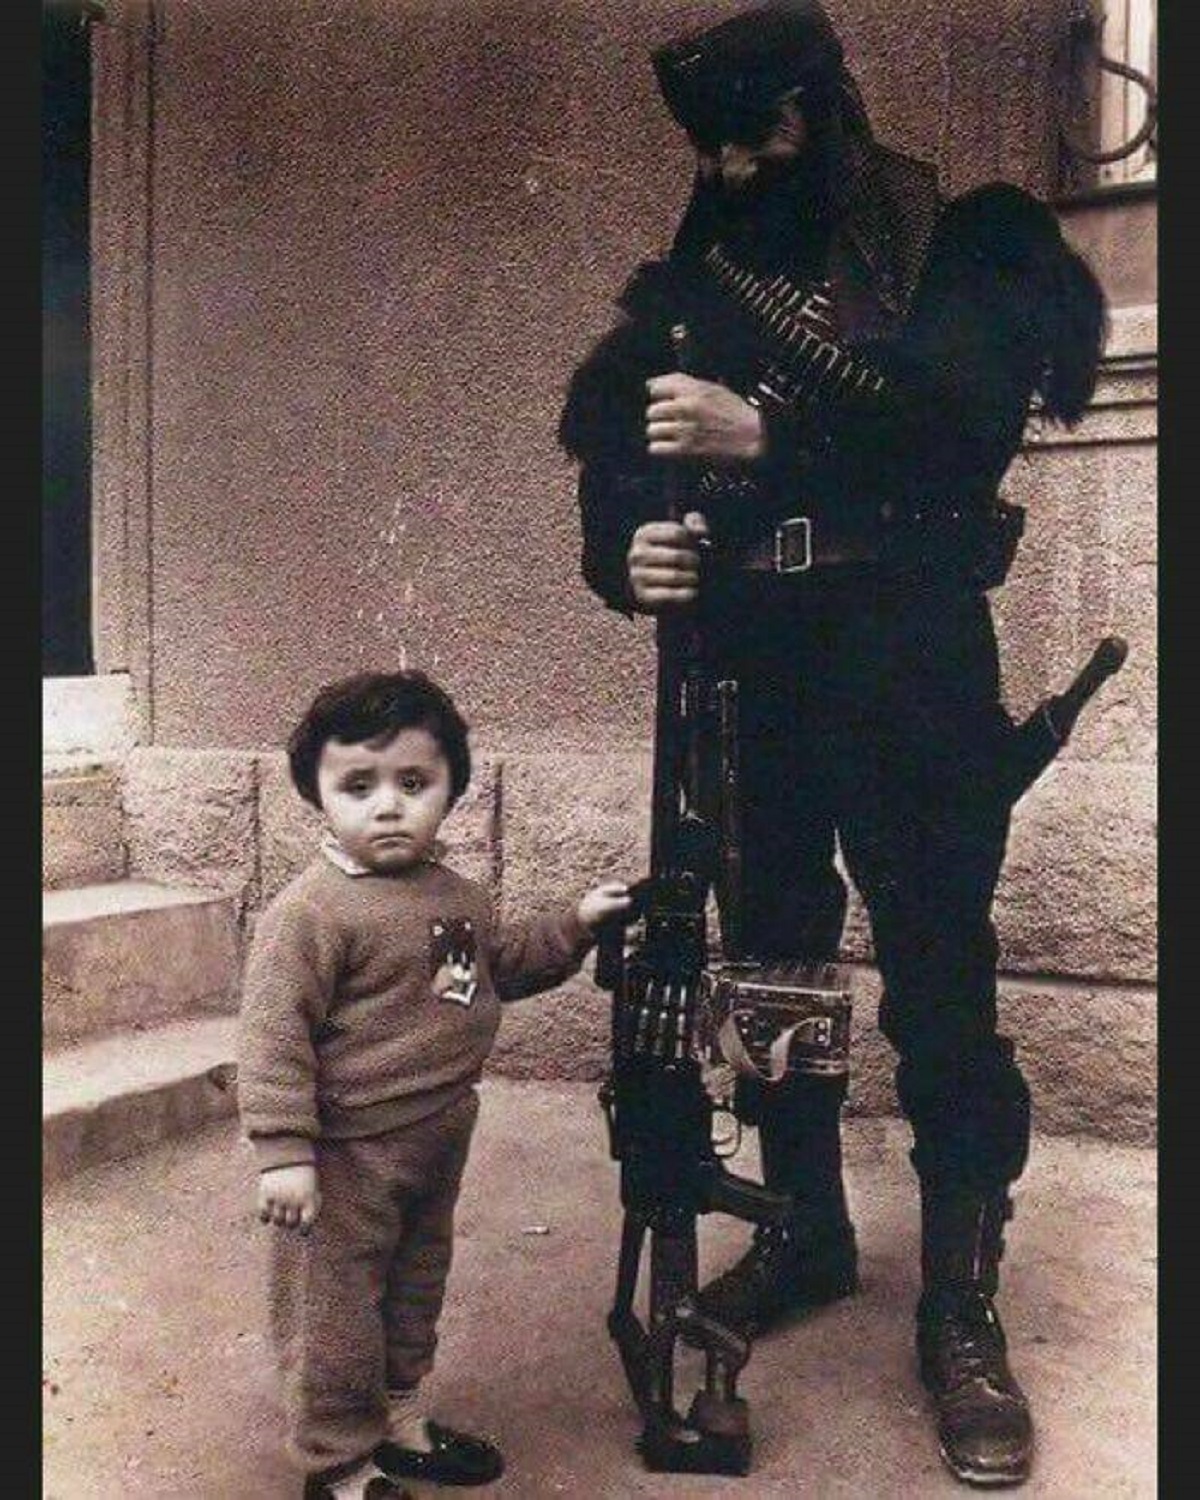 "Pavlik Manukyan, Armenian War Hero During The First Nagorno-Karabakh War In The Early 1990's, Seen During A Visit To His Family Away From The Frontline. He Is Posing Armed With A Pkm Machine Gun, Standing Next To His Son"